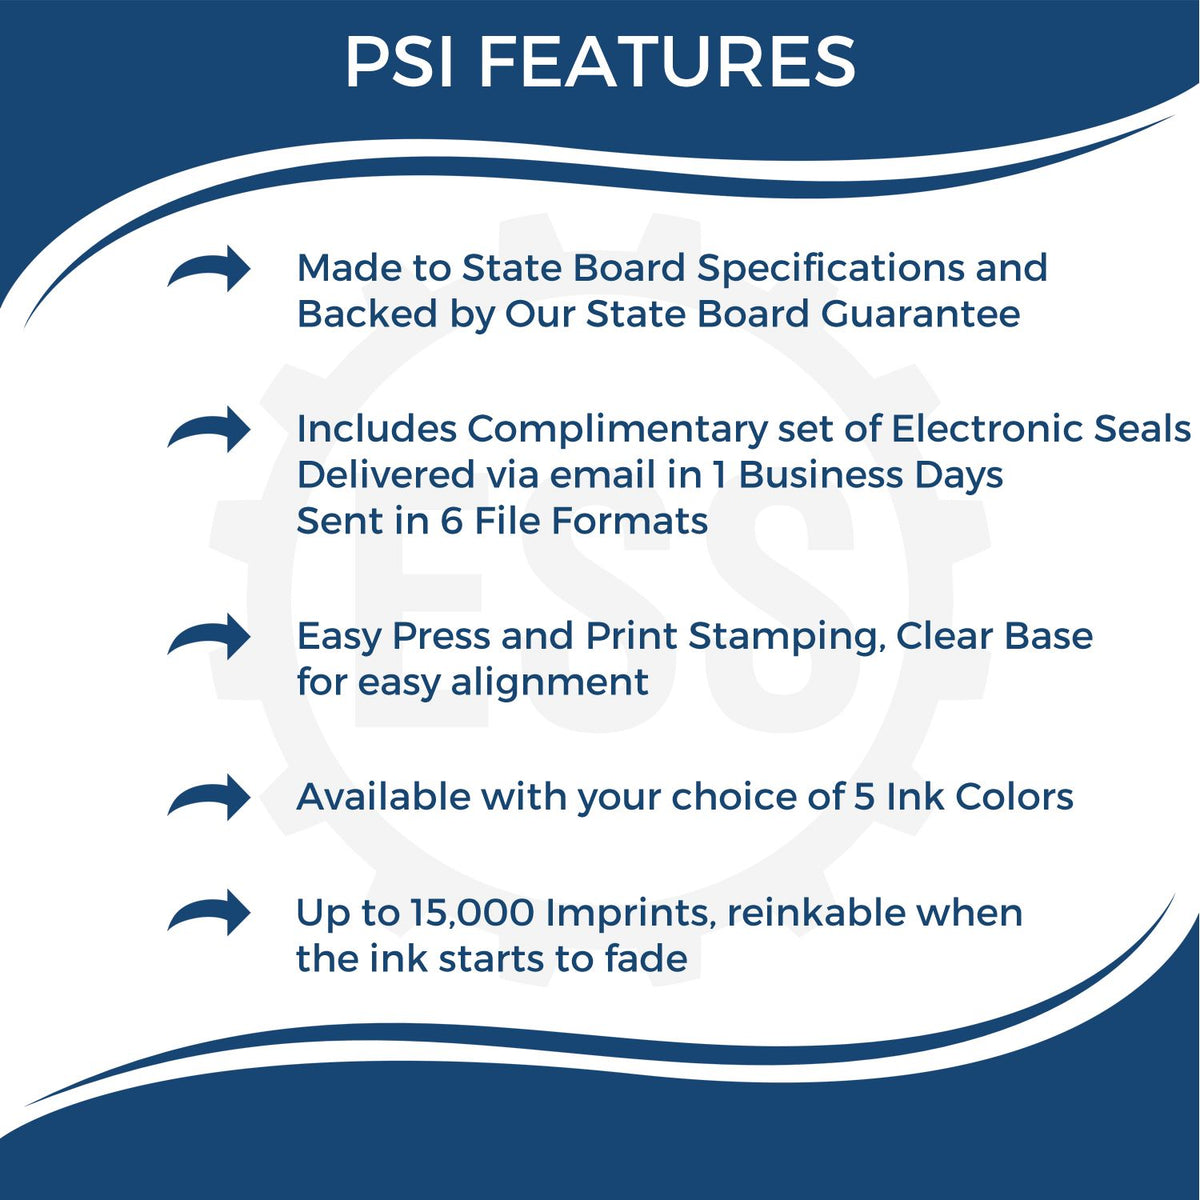 A picture of an infographic highlighting the selling points for the PSI Montana Notary Stamp